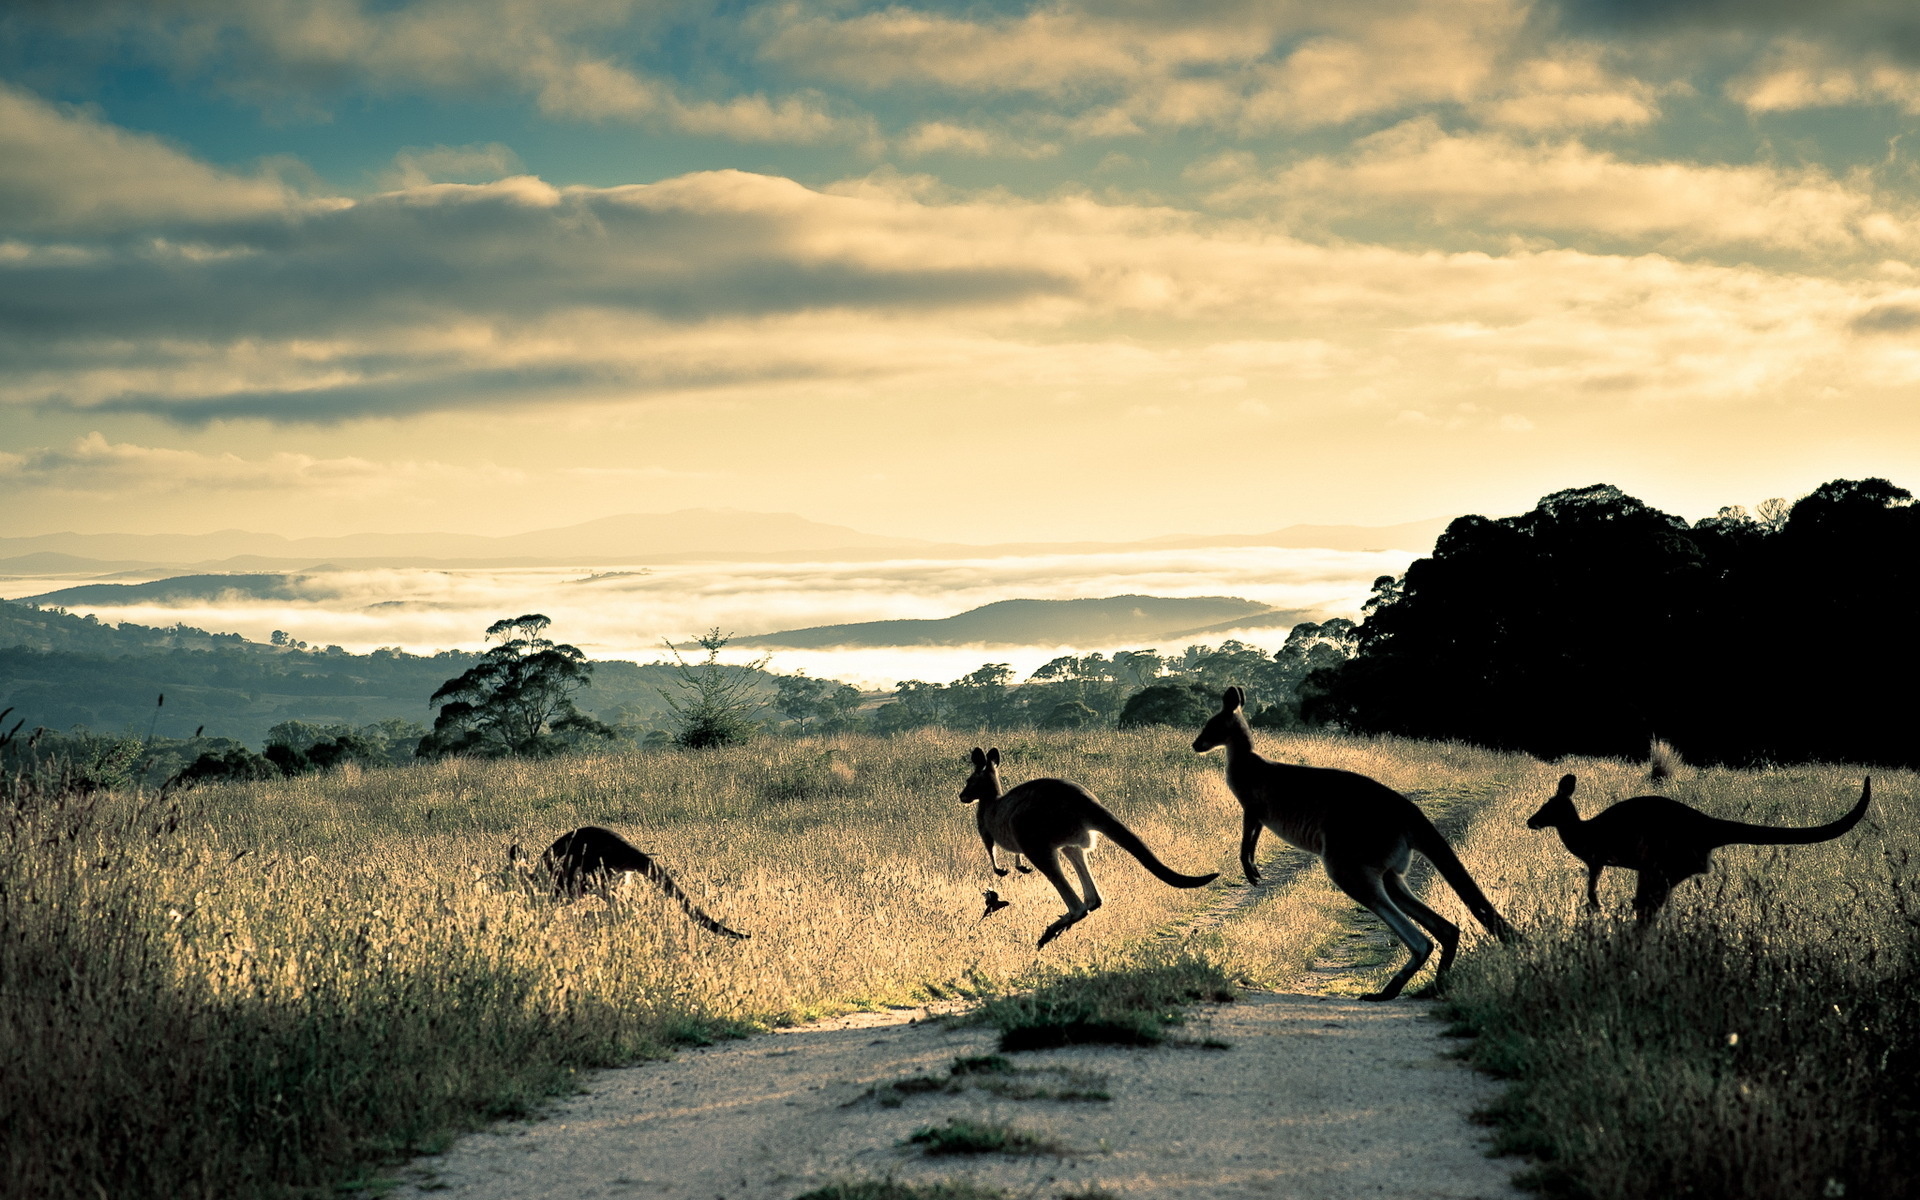 kangaroo, Marsupial, Macropodidae, Animals, Australia, Outback, Roads, Track, Trail, Street, Nature, Landscapes, Fields, Grass, Hills, Scenic, View, Fog, Mist, Clouds, Mountains, Sky, Clouds Wallpaper